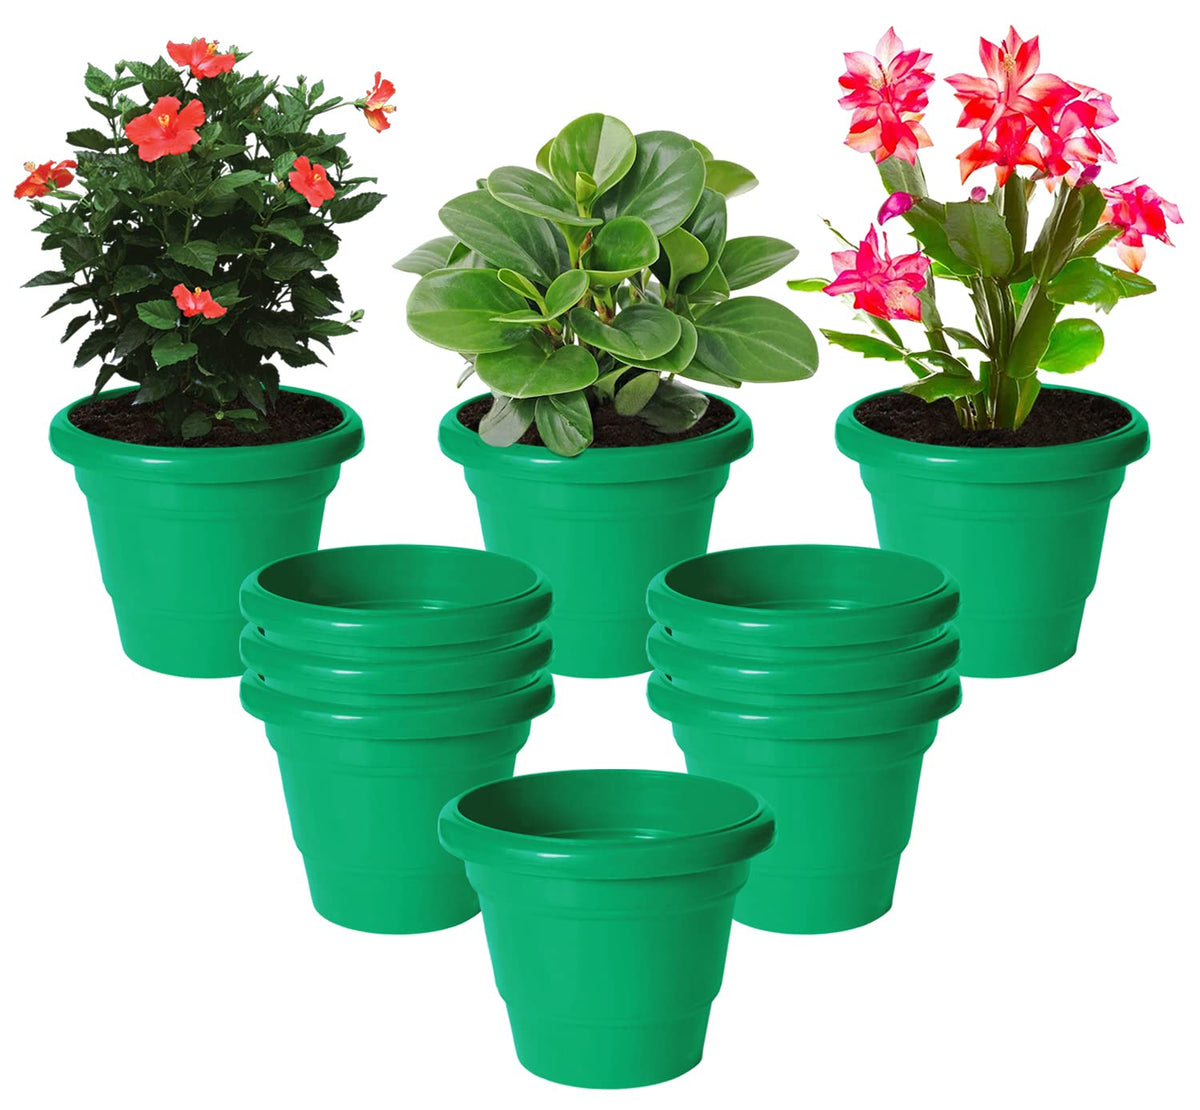 Kuber Industries Solid 2 Layered Plastic Flower Pot|Gamla for Home Decor,Nursery,Balcony,Garden,6"x5",Pack of 10 (Green)